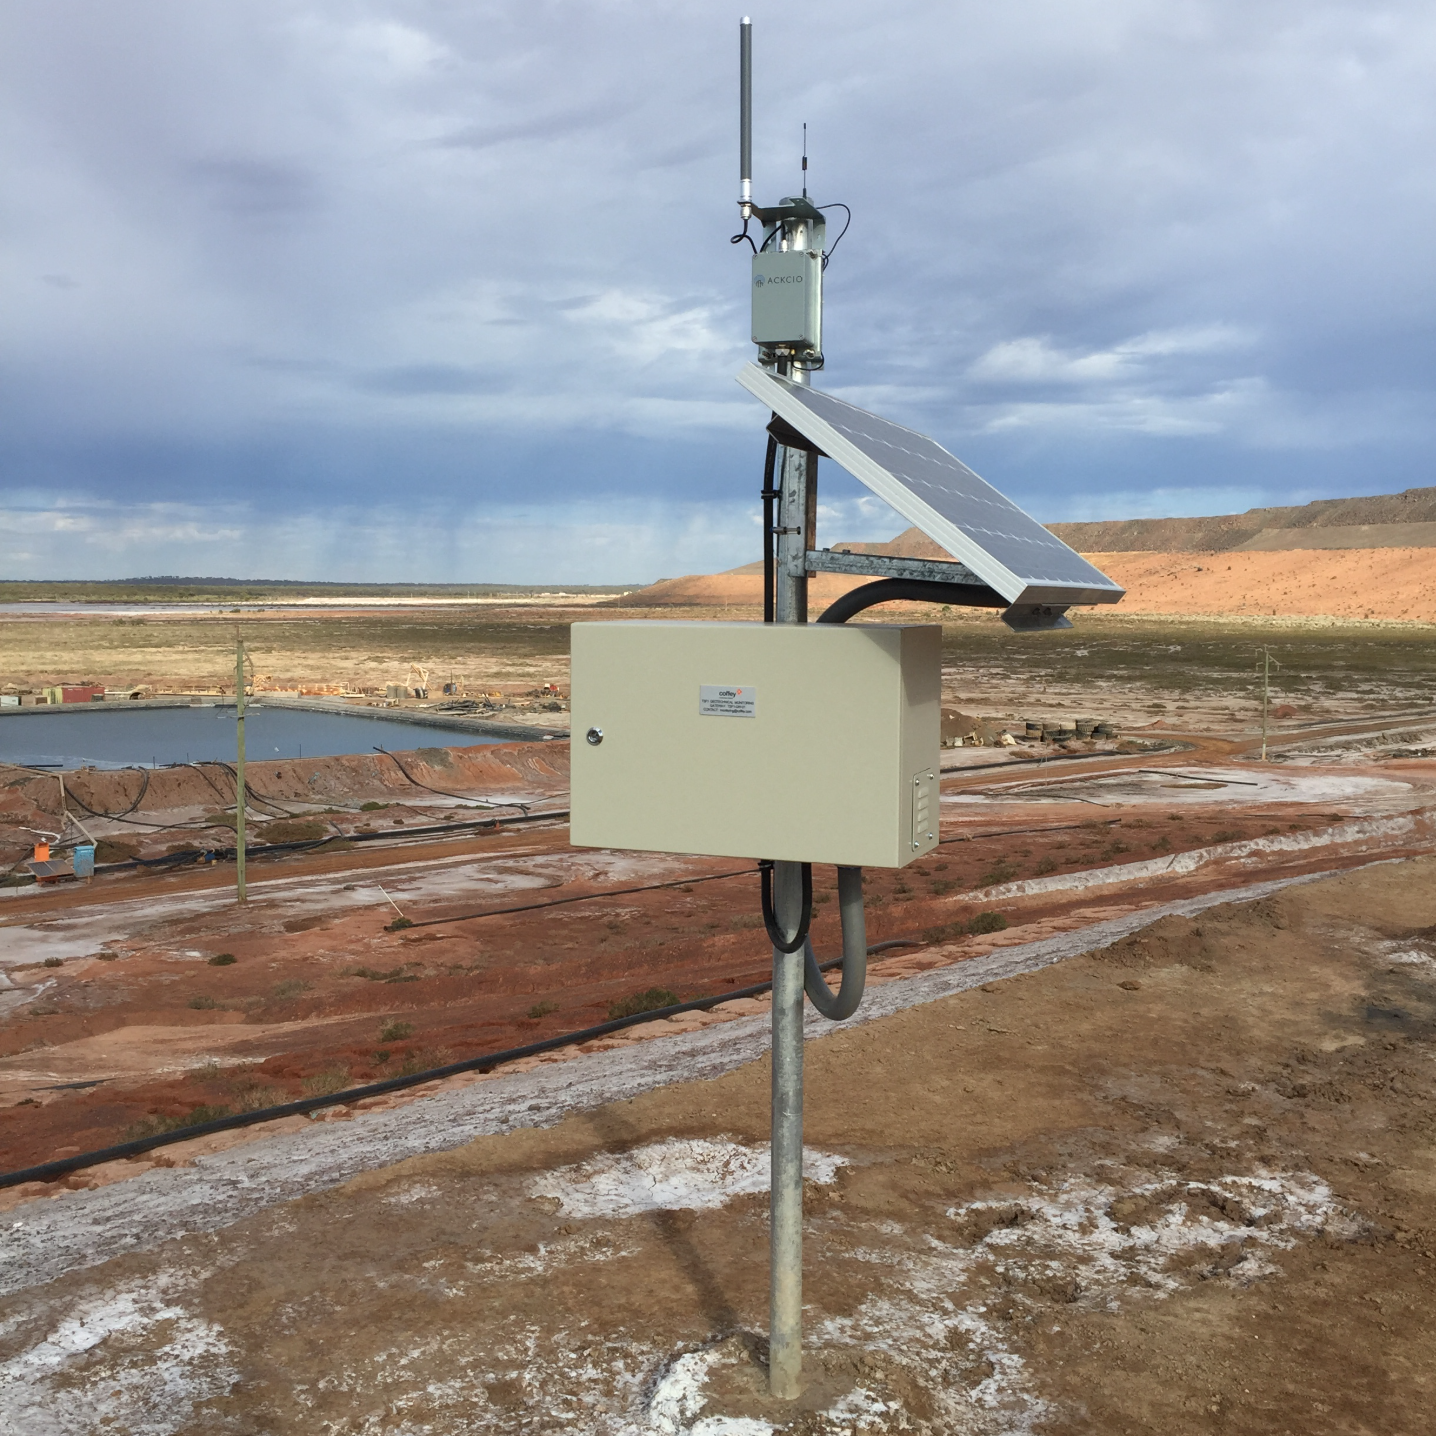 IMDA Spark Programme: Ackcio Beam used to monitor sensors on a tailings dam at a gold processing facility in Kalgoorlie, Western Australia